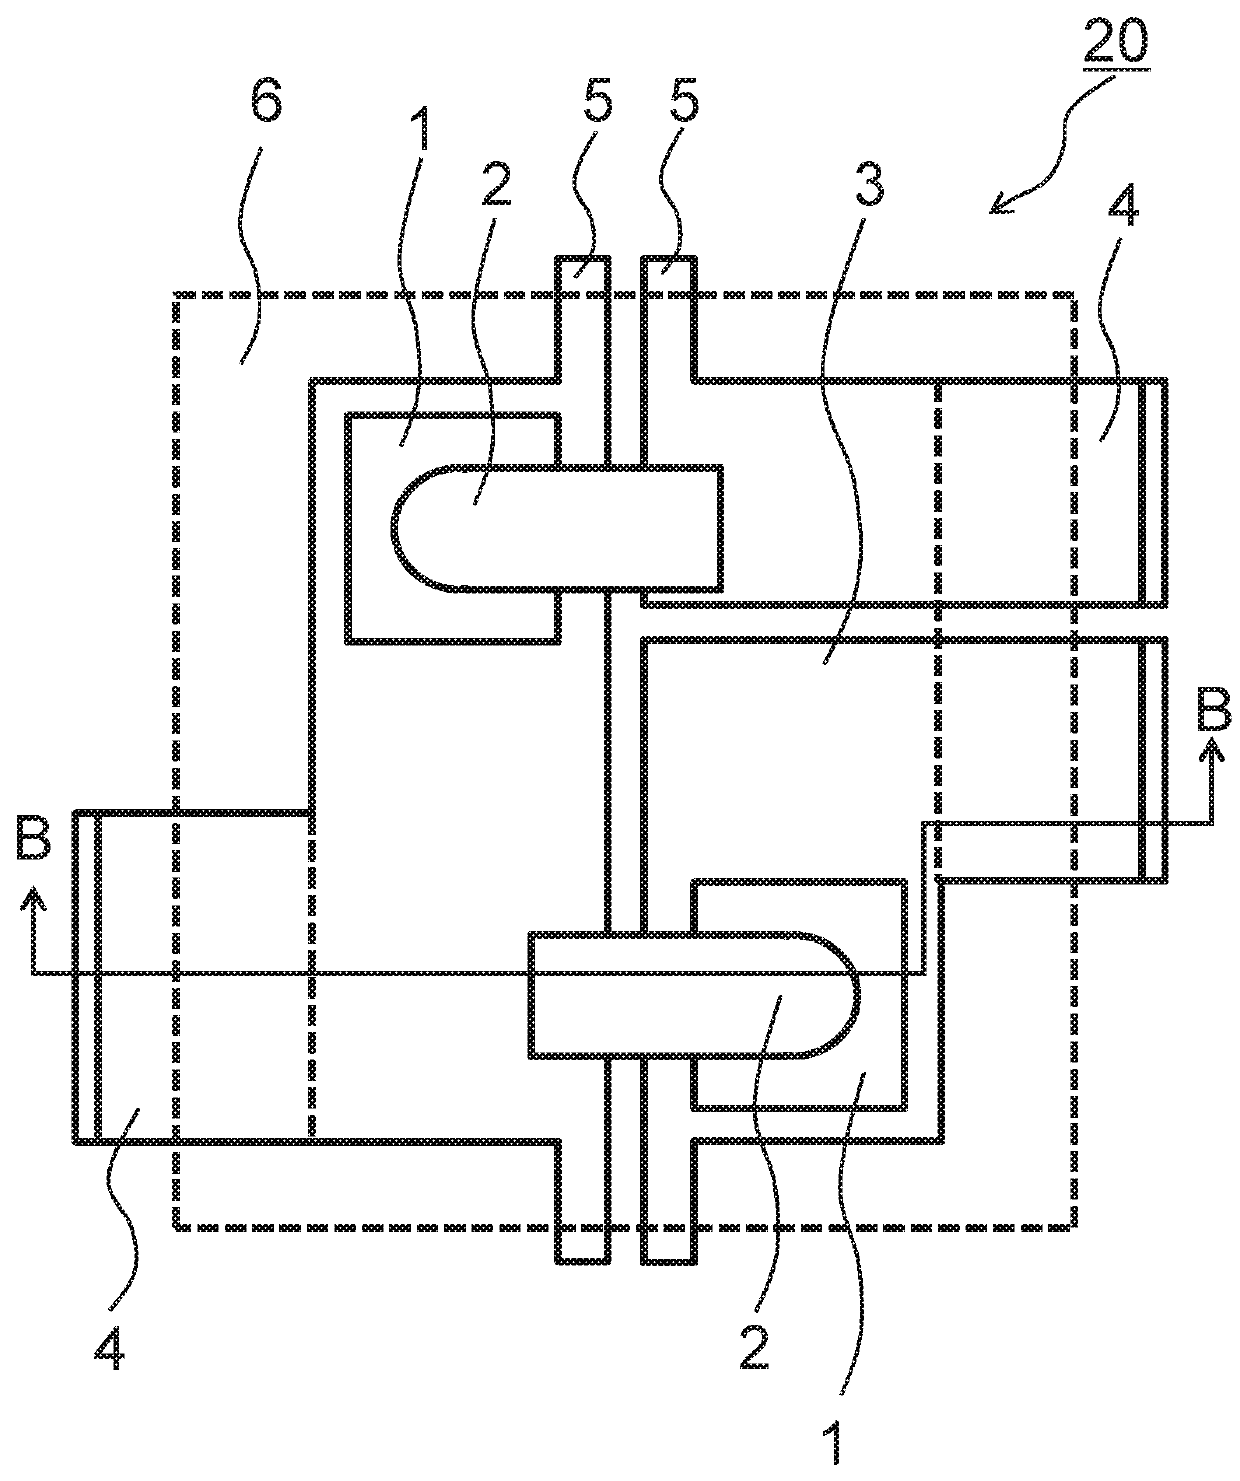 Molded resin-sealed power semiconductor device